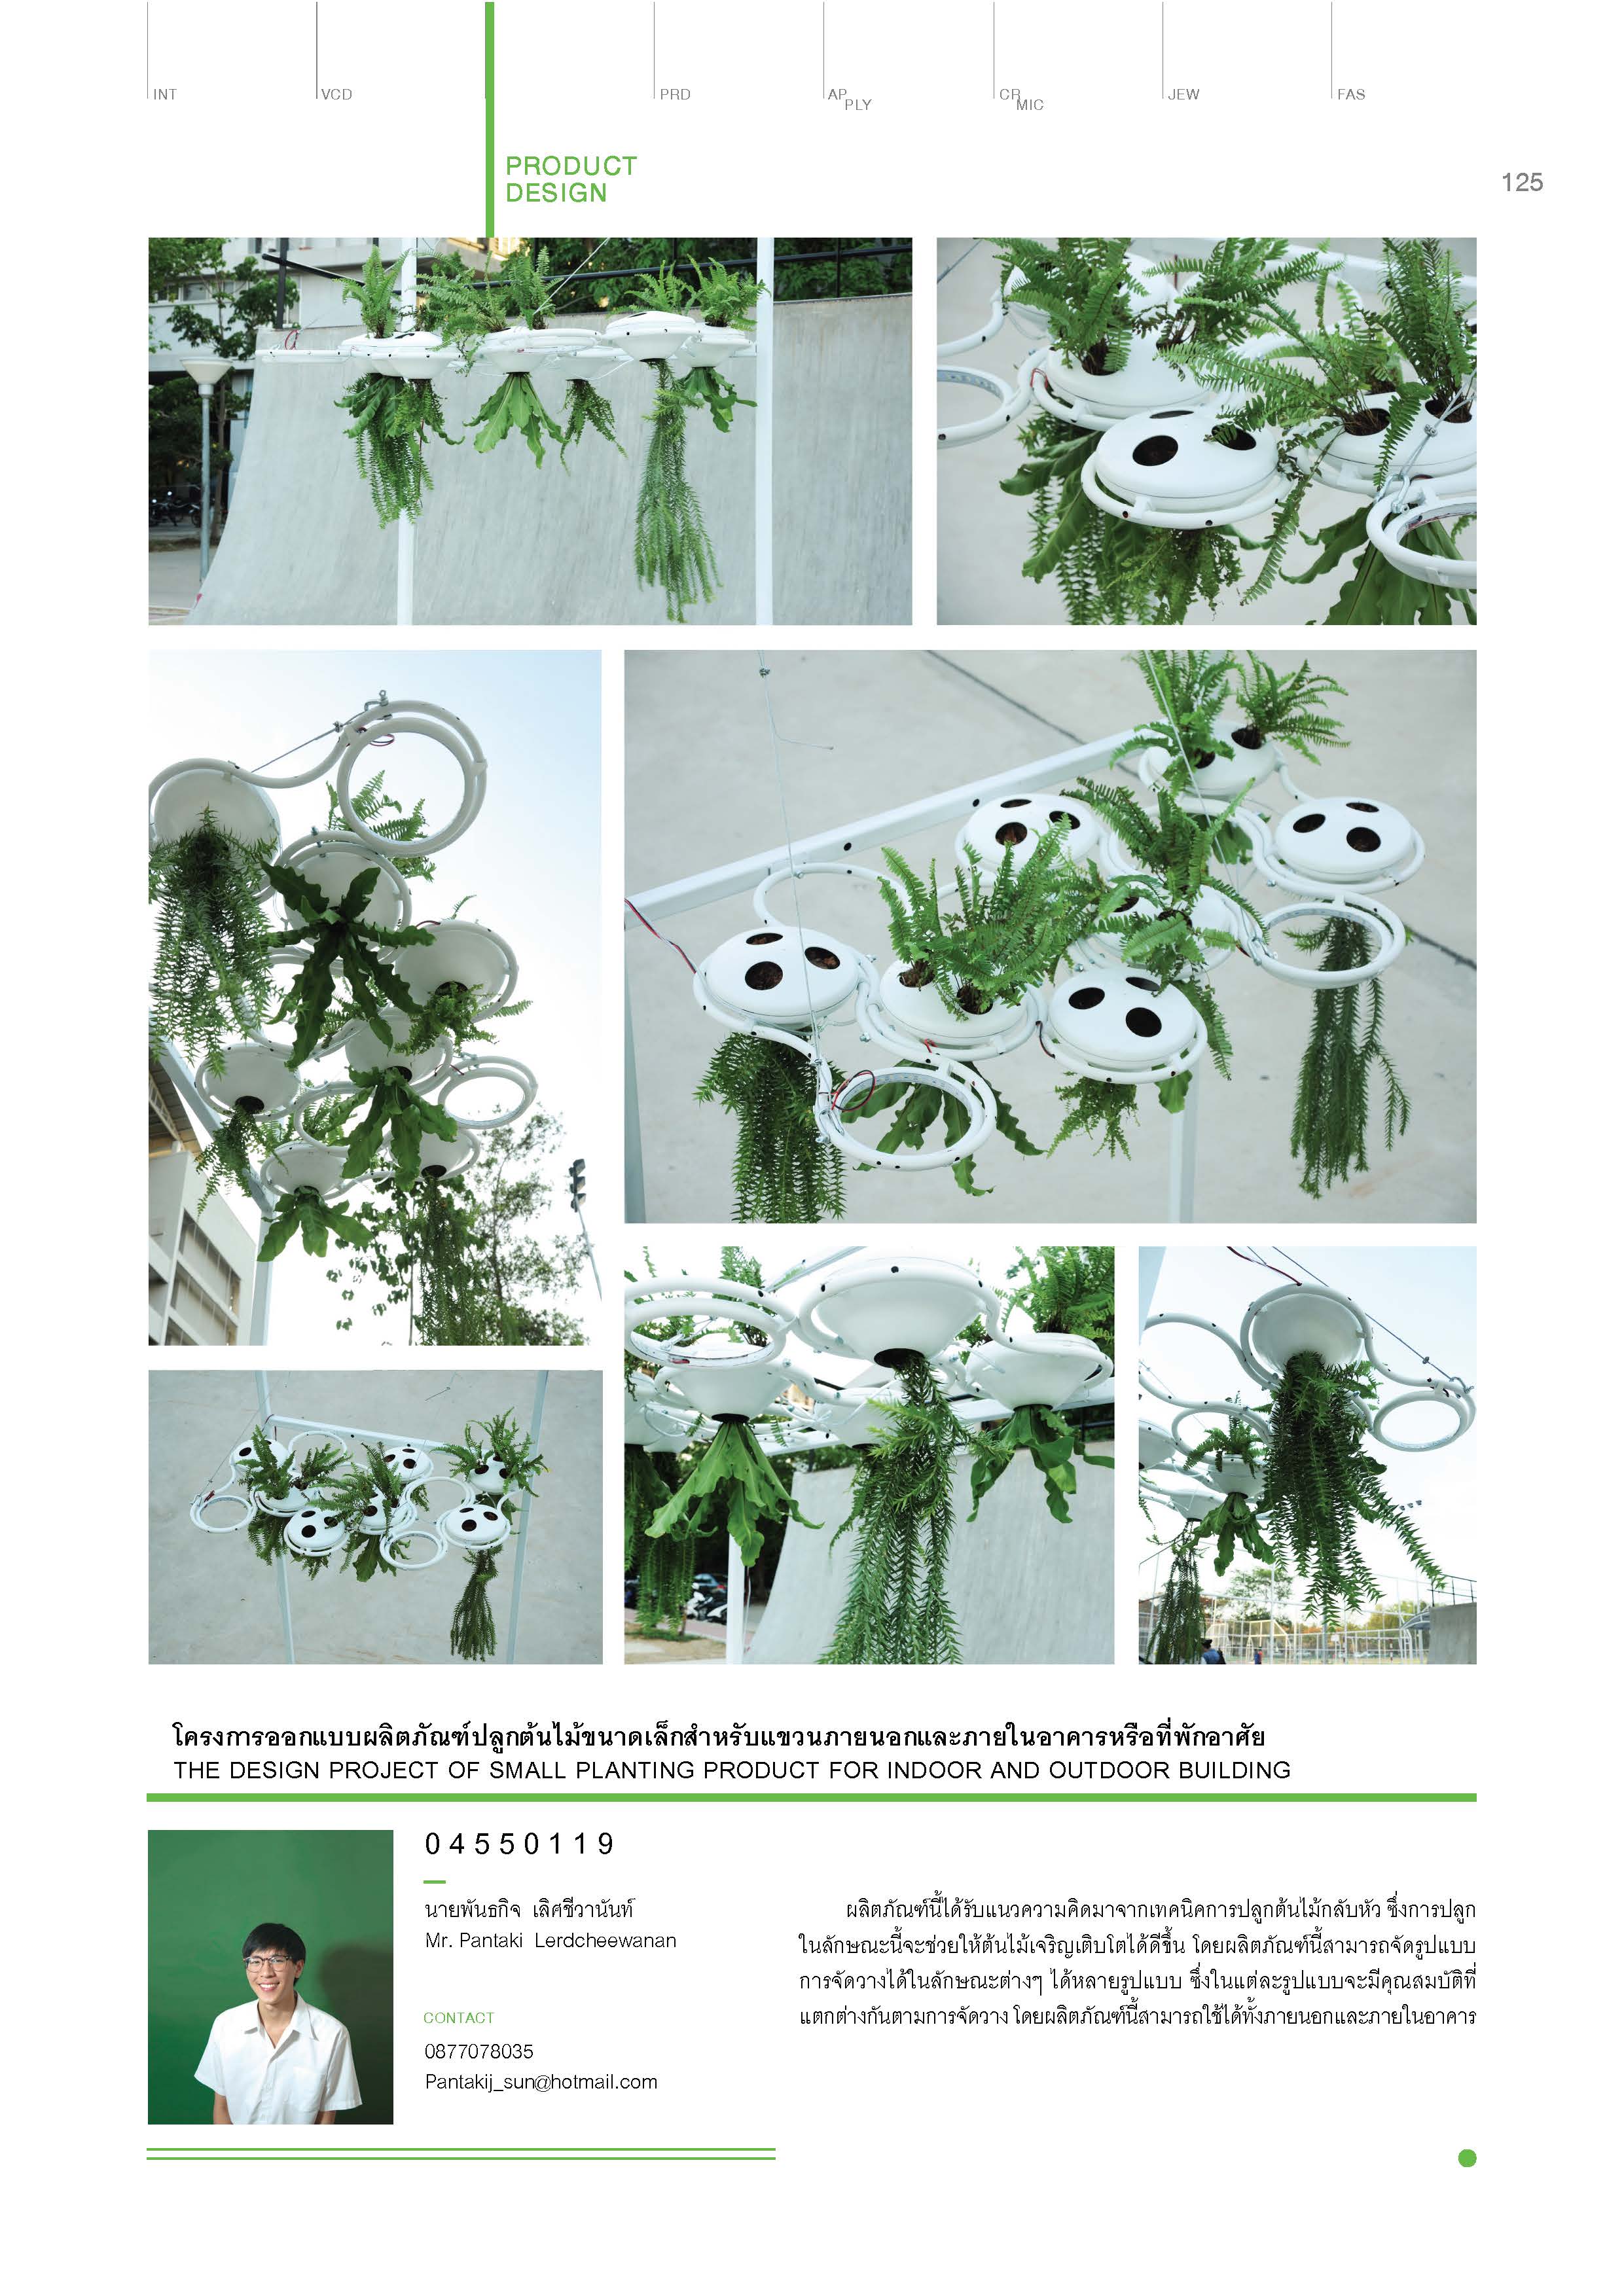 Photosynthesis-The46th_Art_Thesis_Exhibition_Decorative_Arts_Page_145